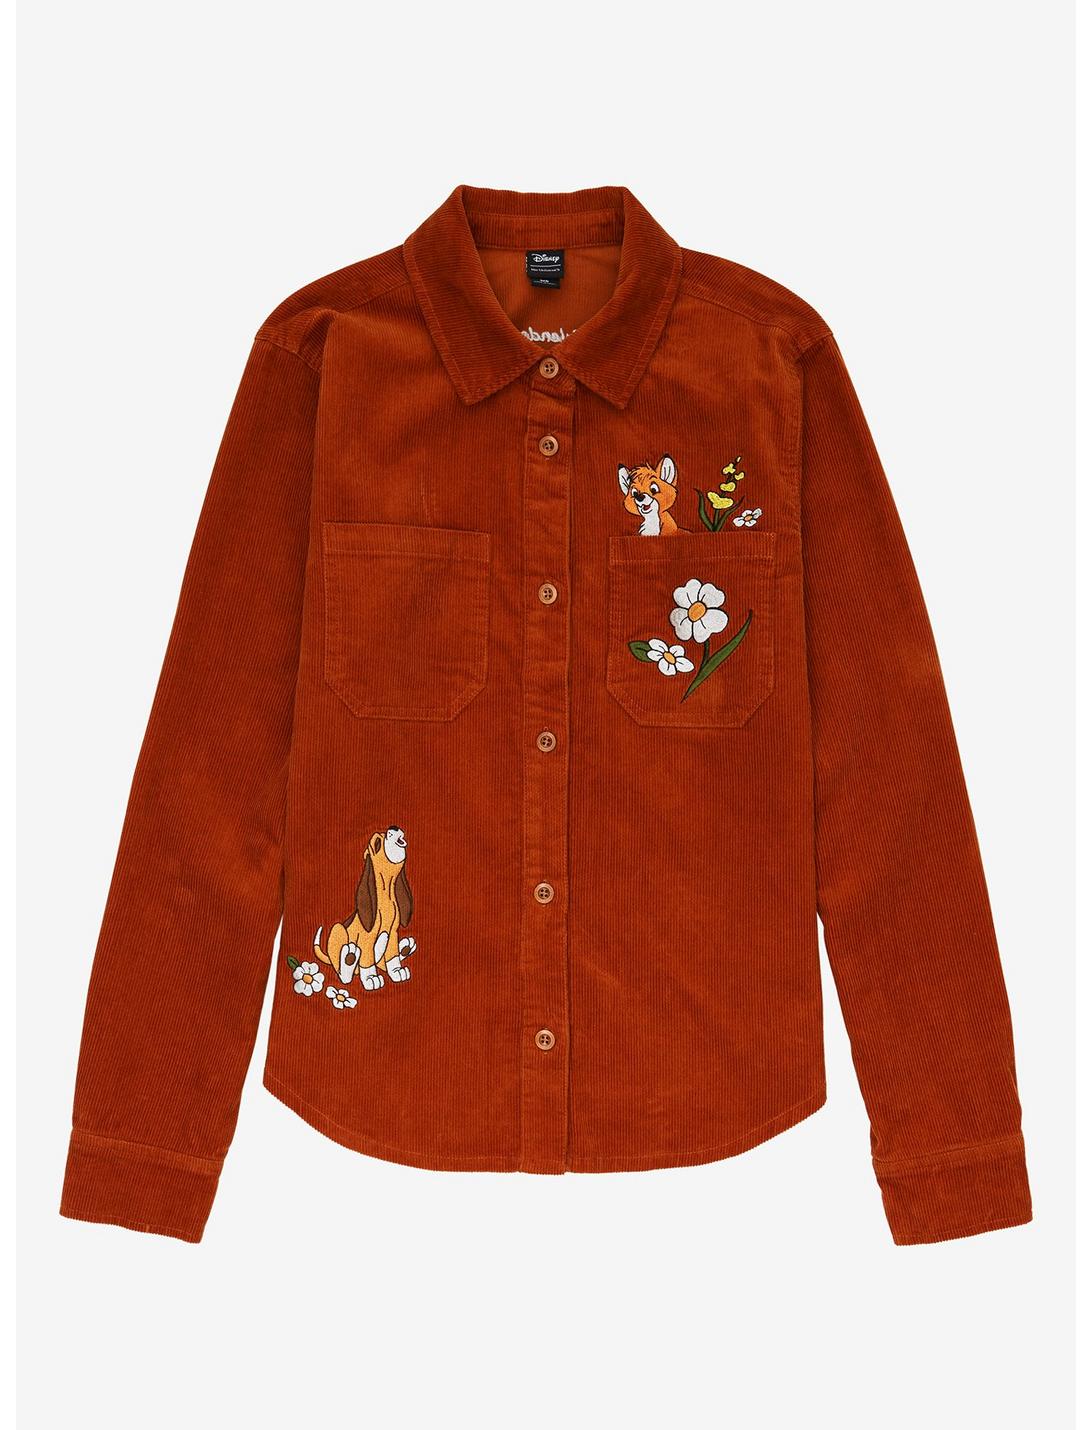 Her Universe Disney The Fox and the Hound Always Be Friends Corduroy Shacket, BROWN, hi-res